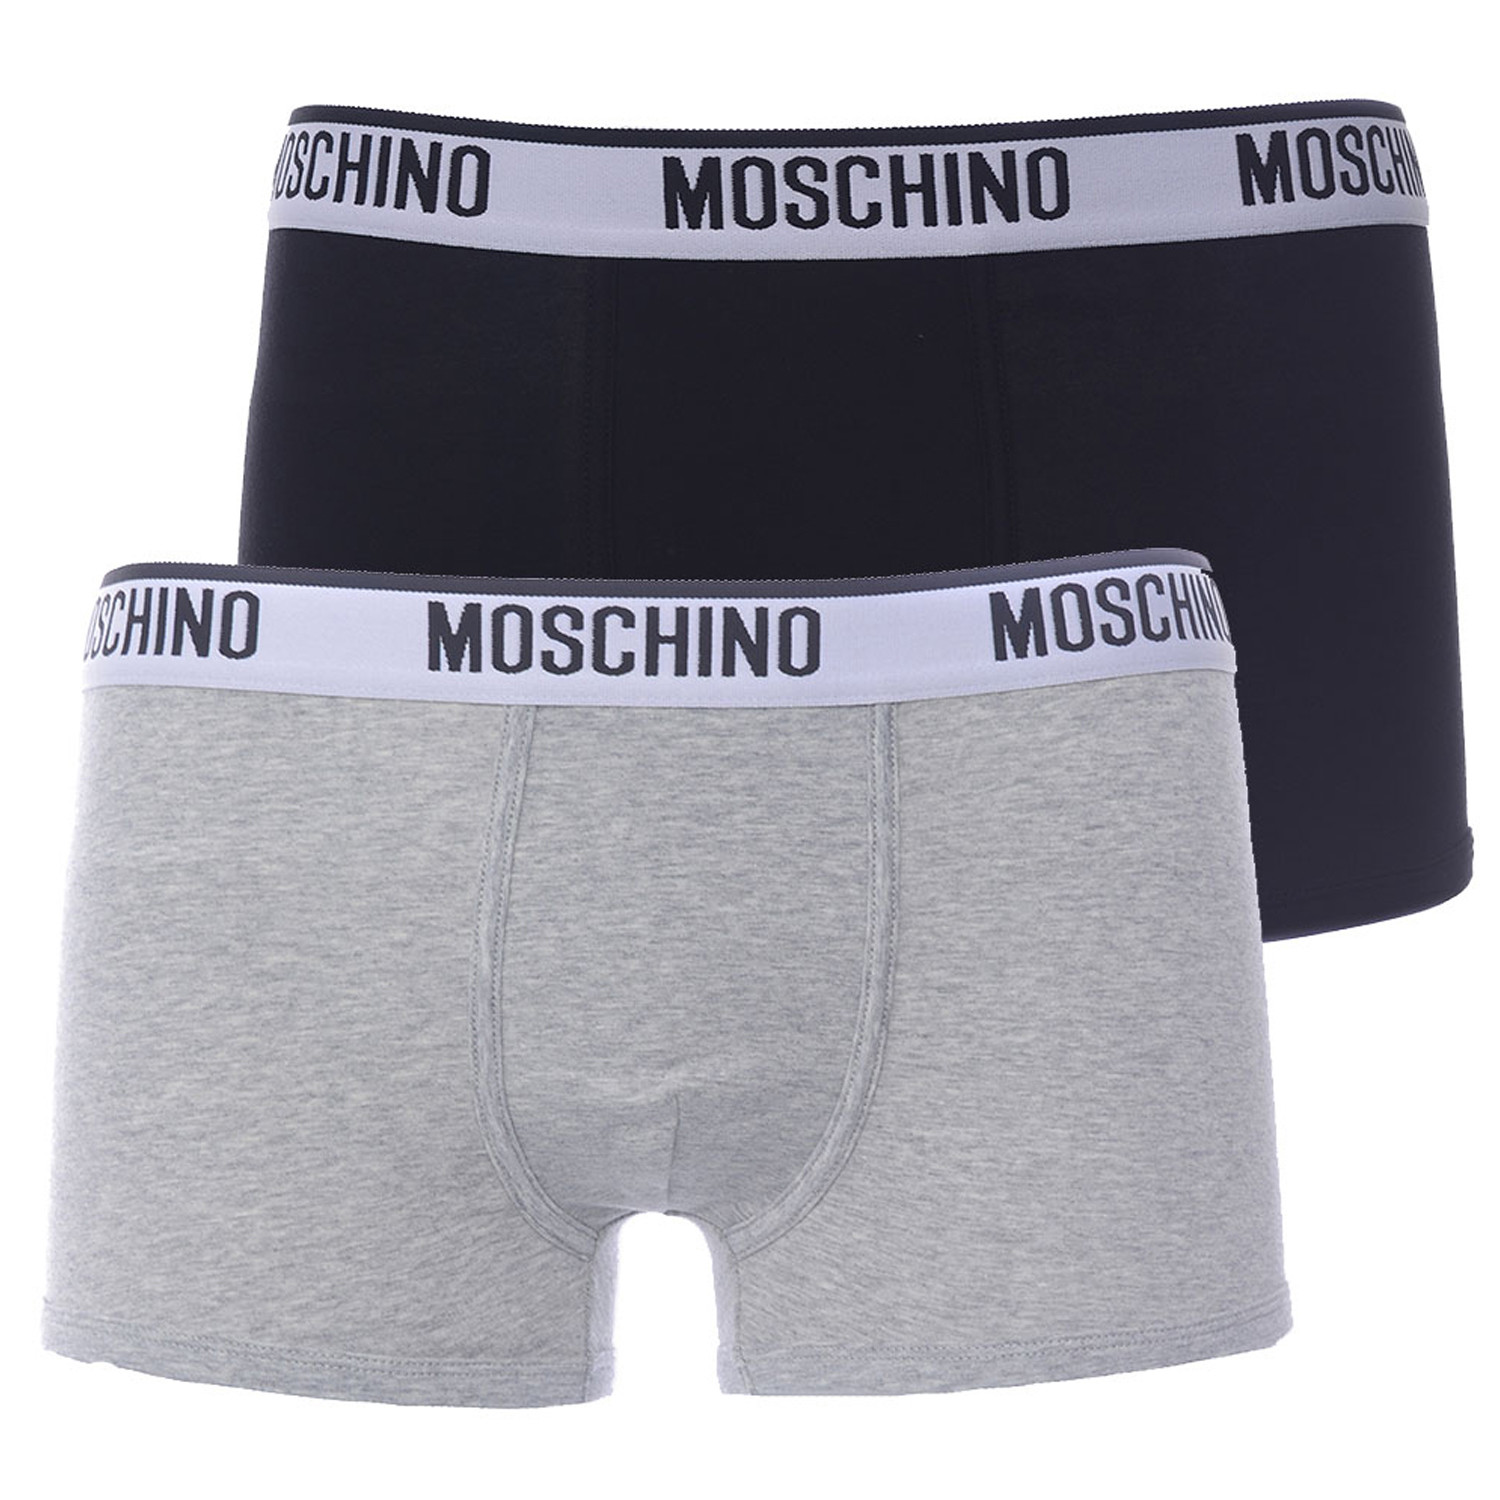 Moschino // Boxers // Pack of 2 // Black + Gray (M) - Tagelite ...